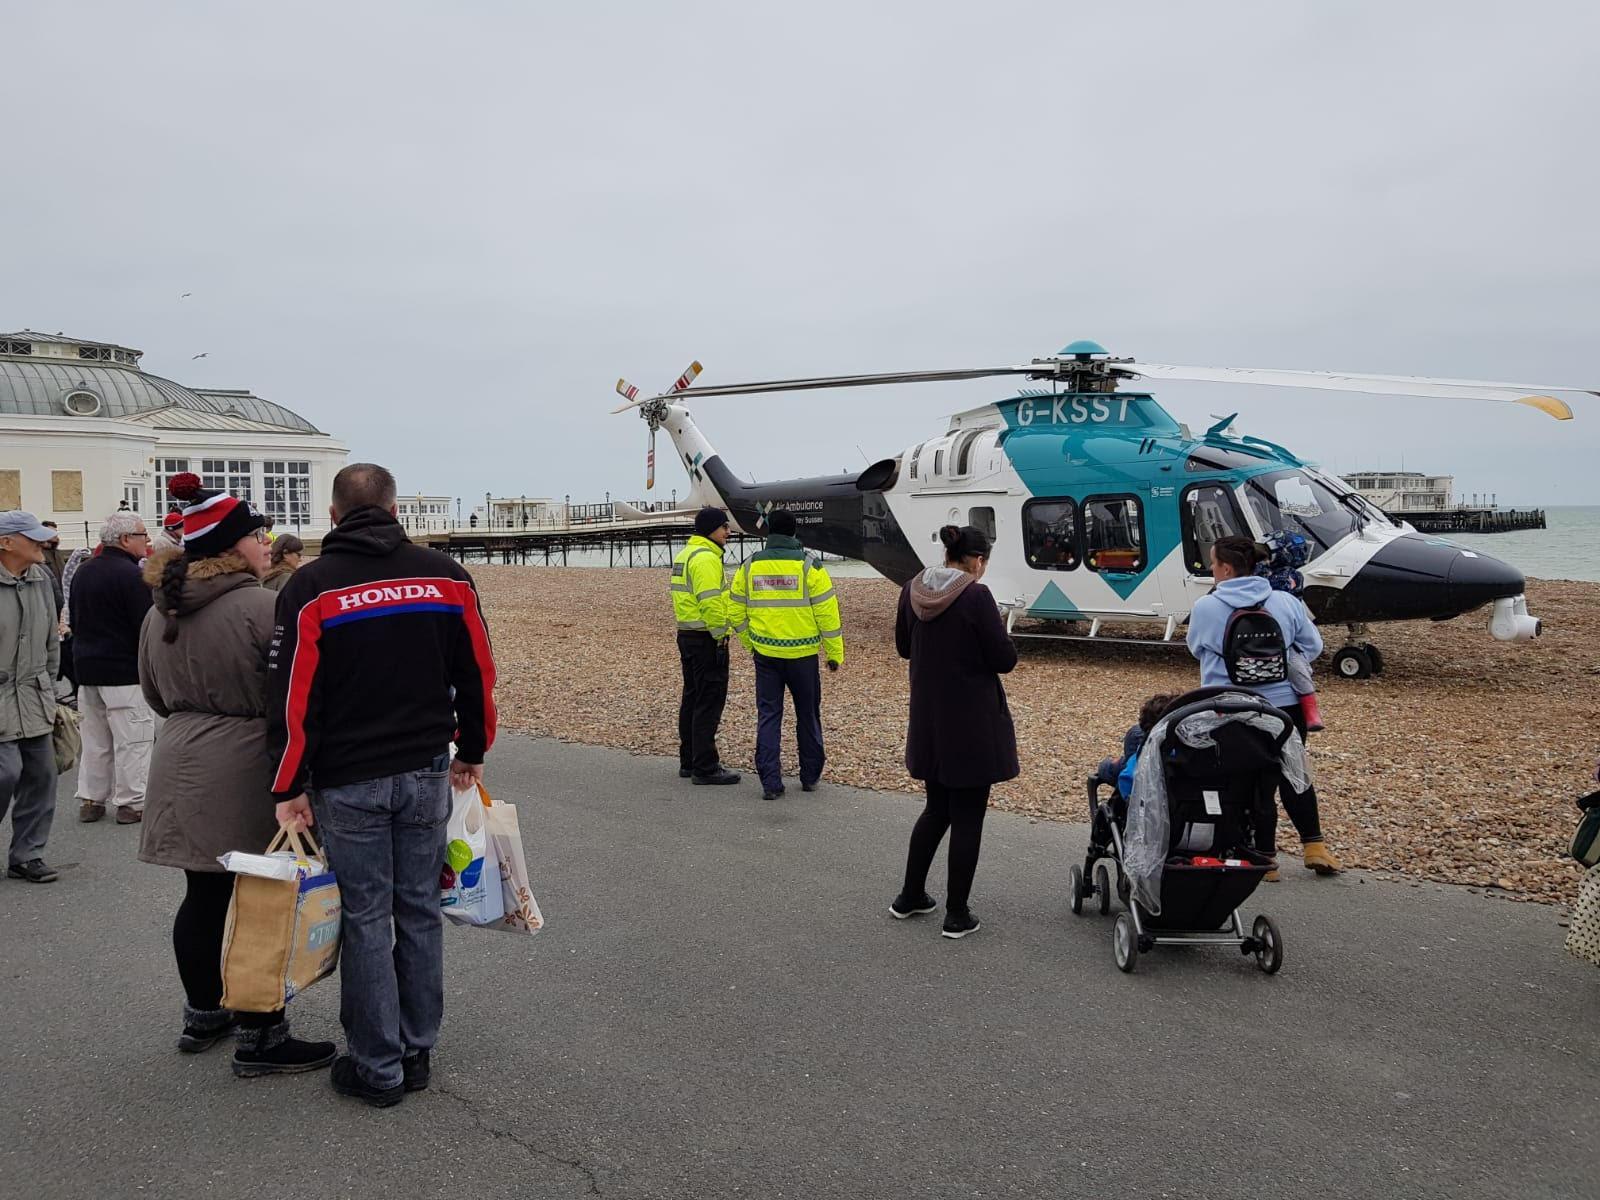 The air ambulance landed by Worthing Pier